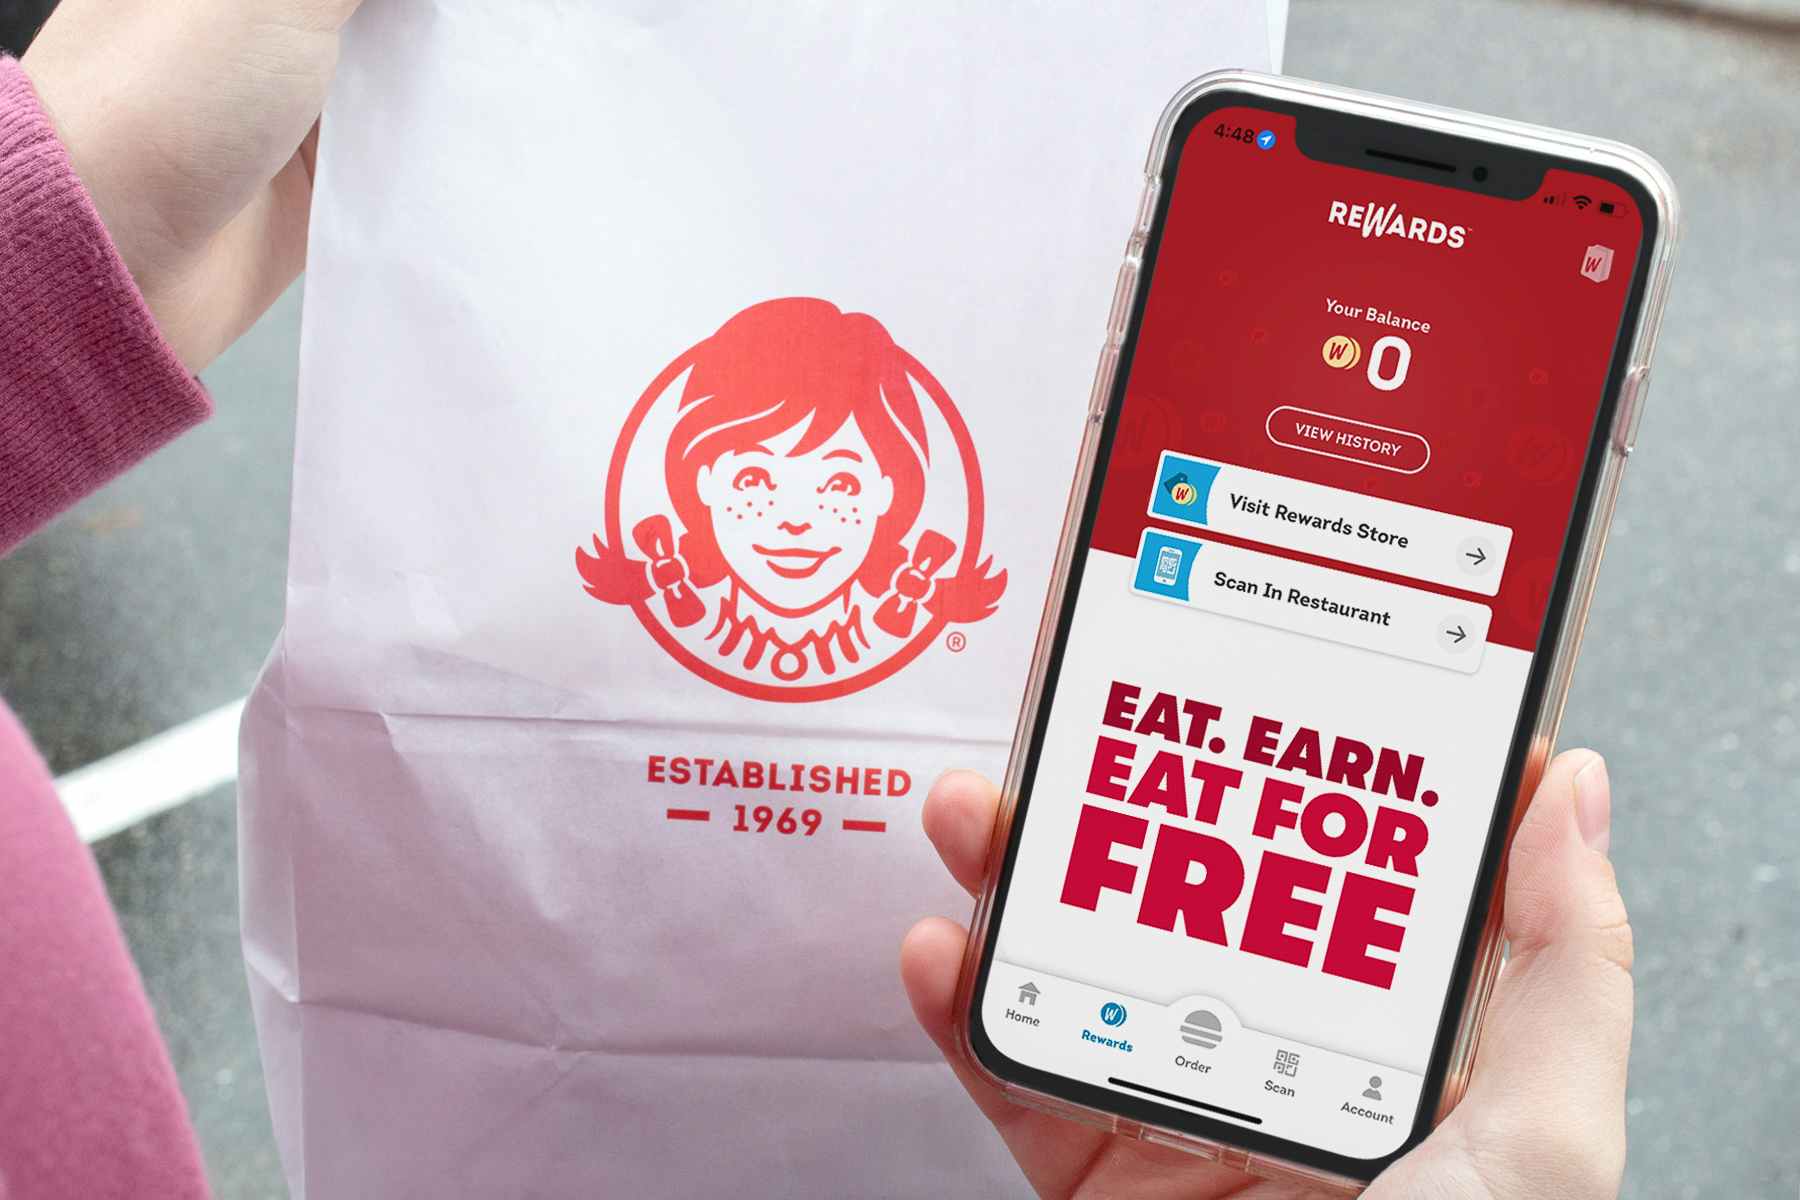 A person holding their phone displaying the Wendy's rewards app